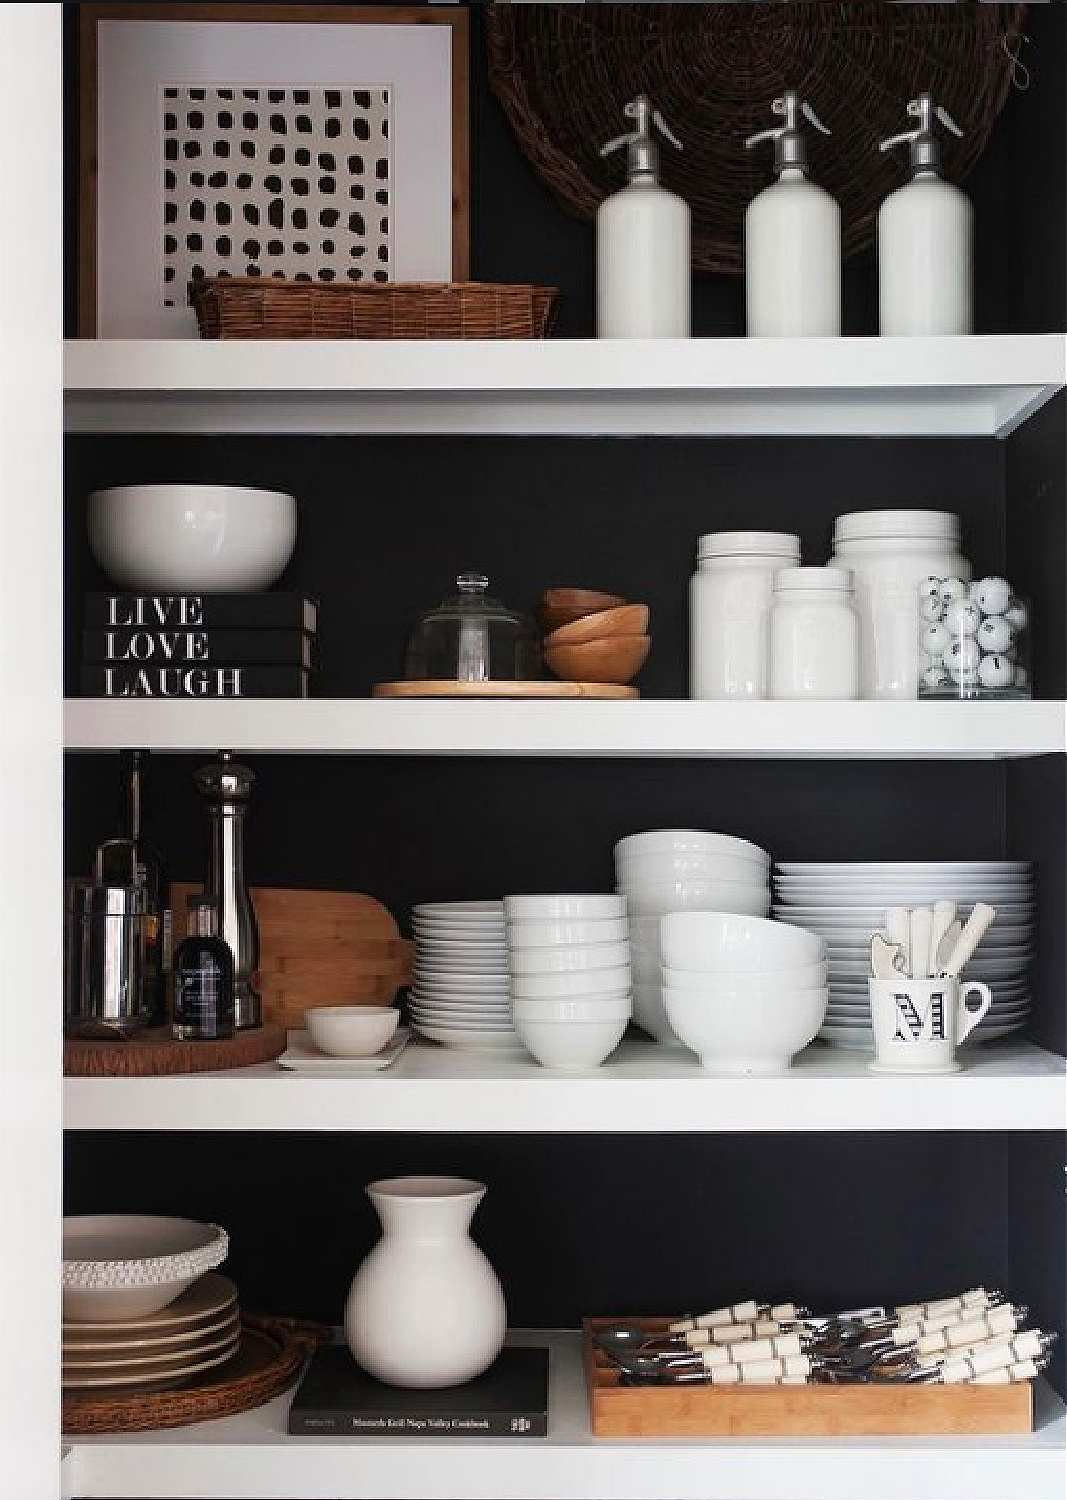 Deep black painted pantry wall with white shelves and white dishes - Sherry Hart. #blackwalls #blackpaintcolors #blackandwhiteinteriors